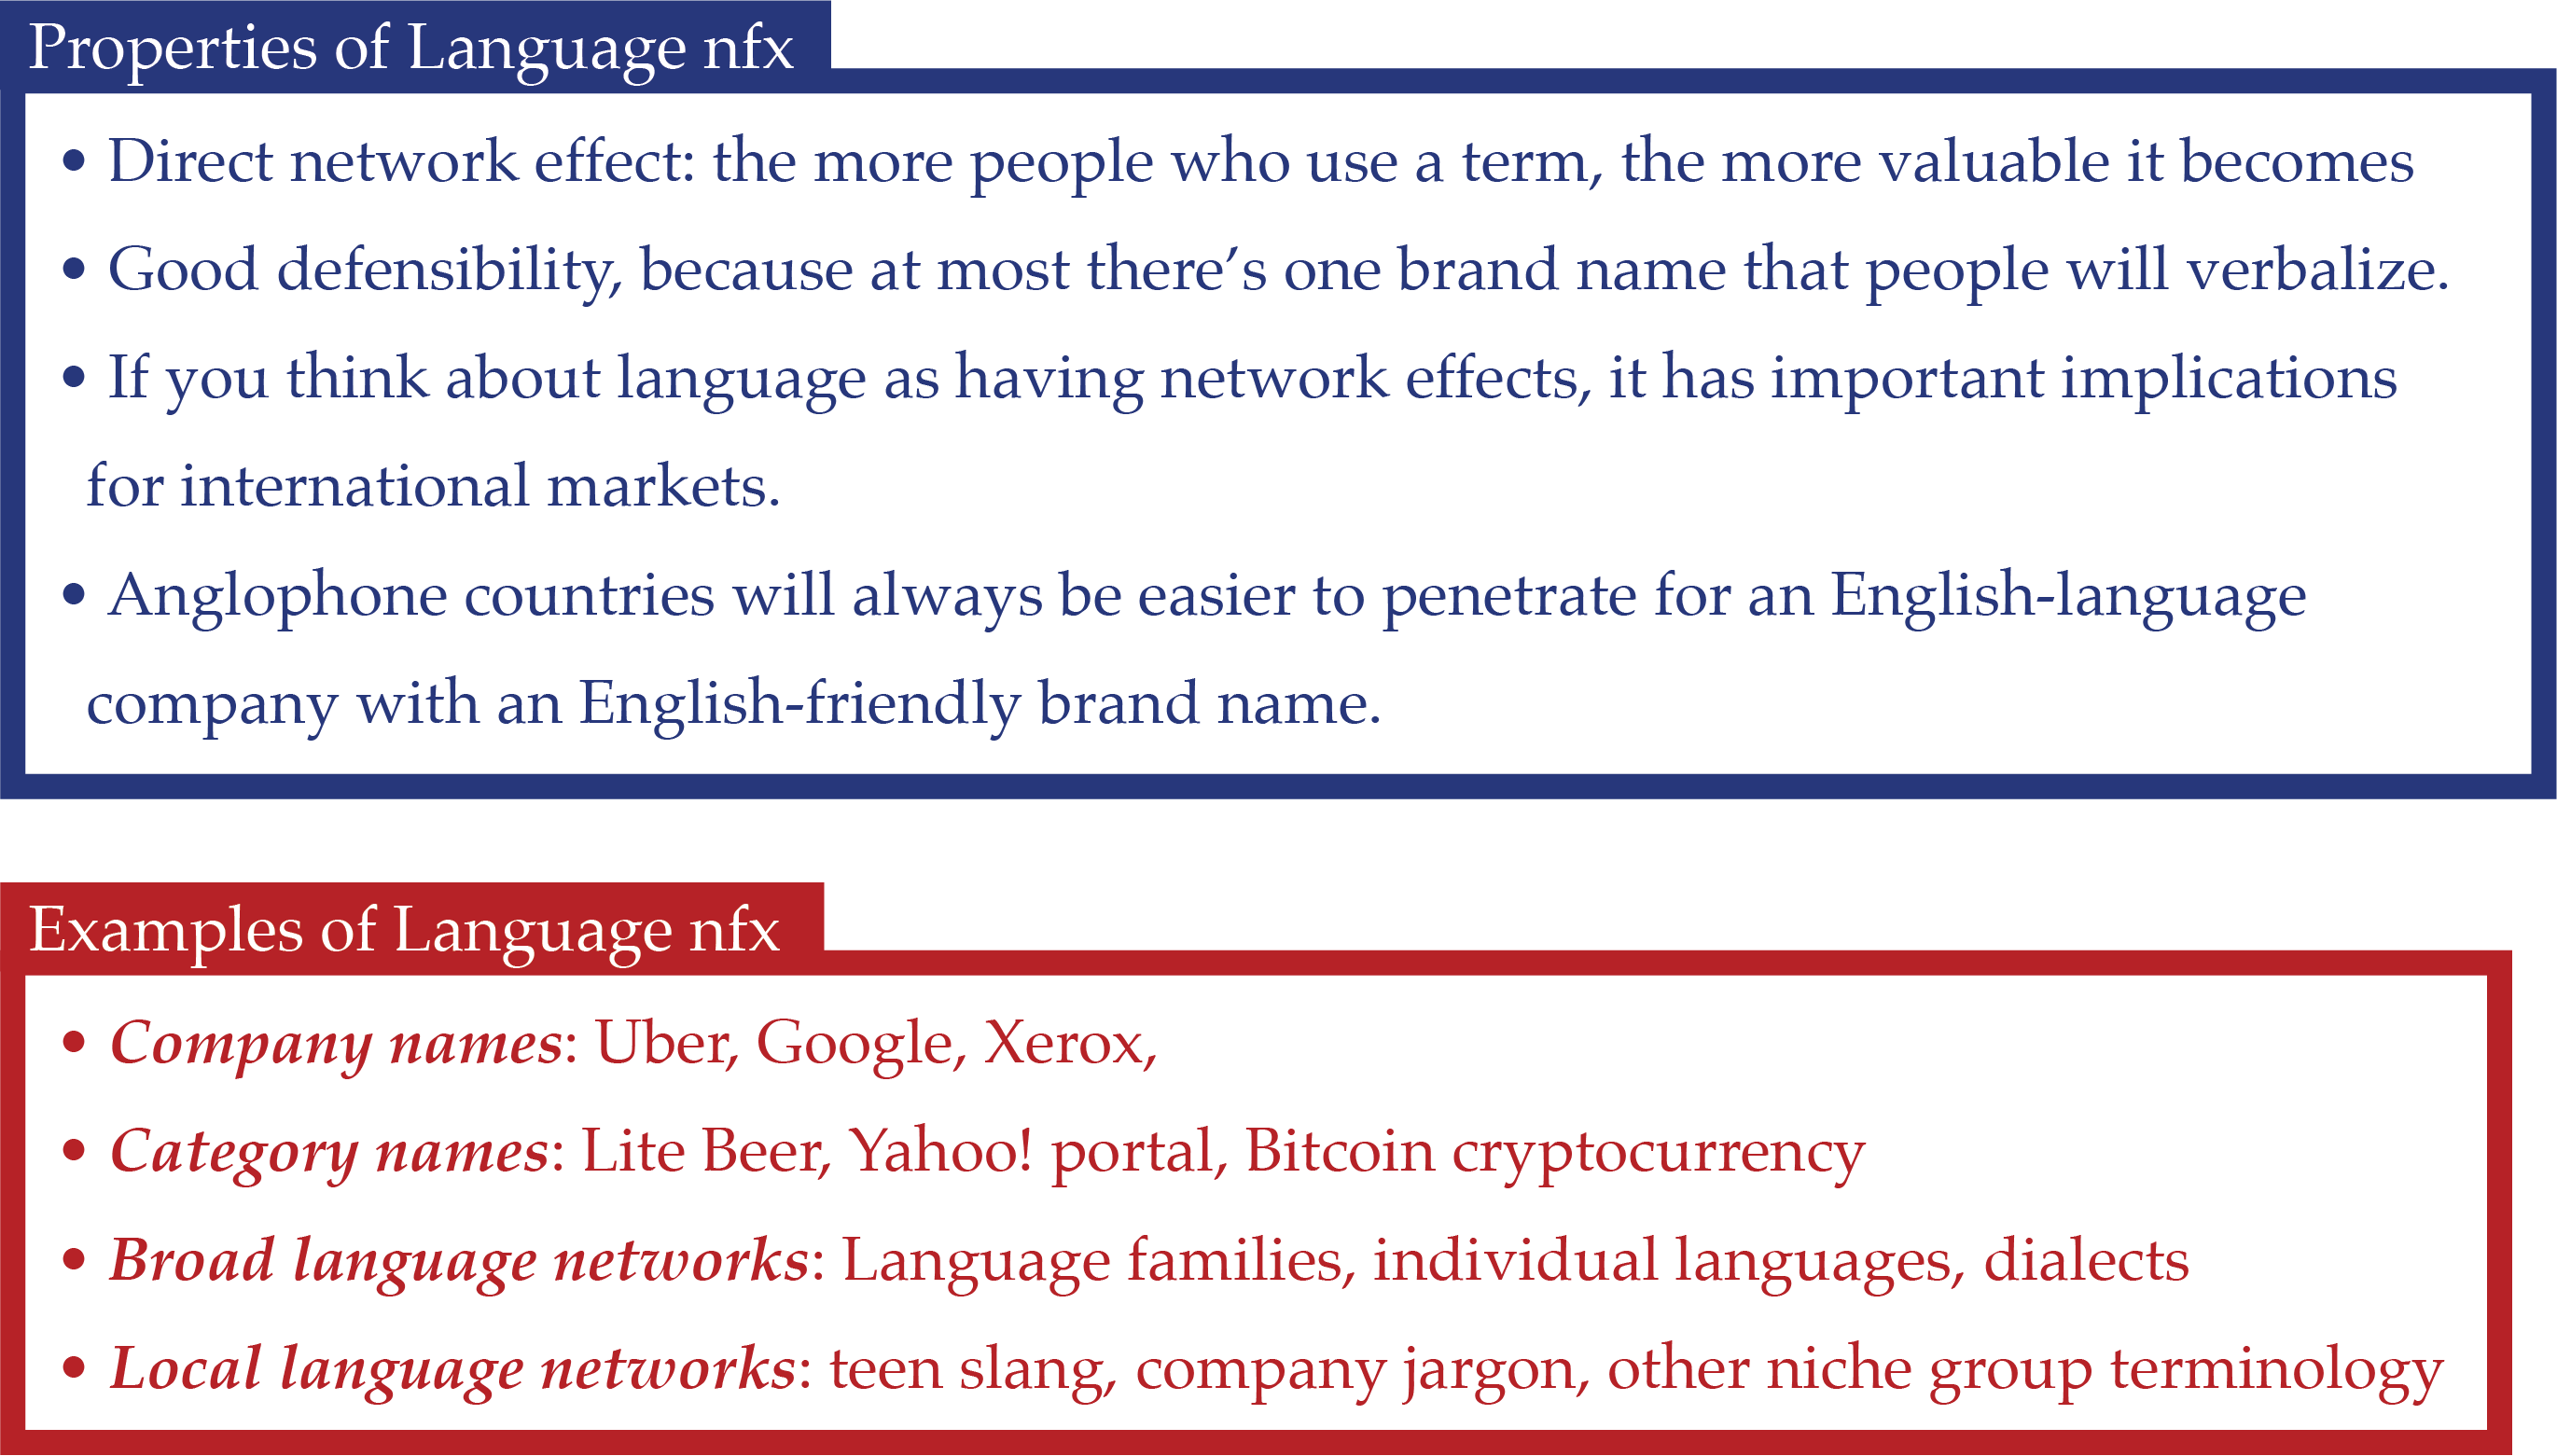 Properties and Example of Language